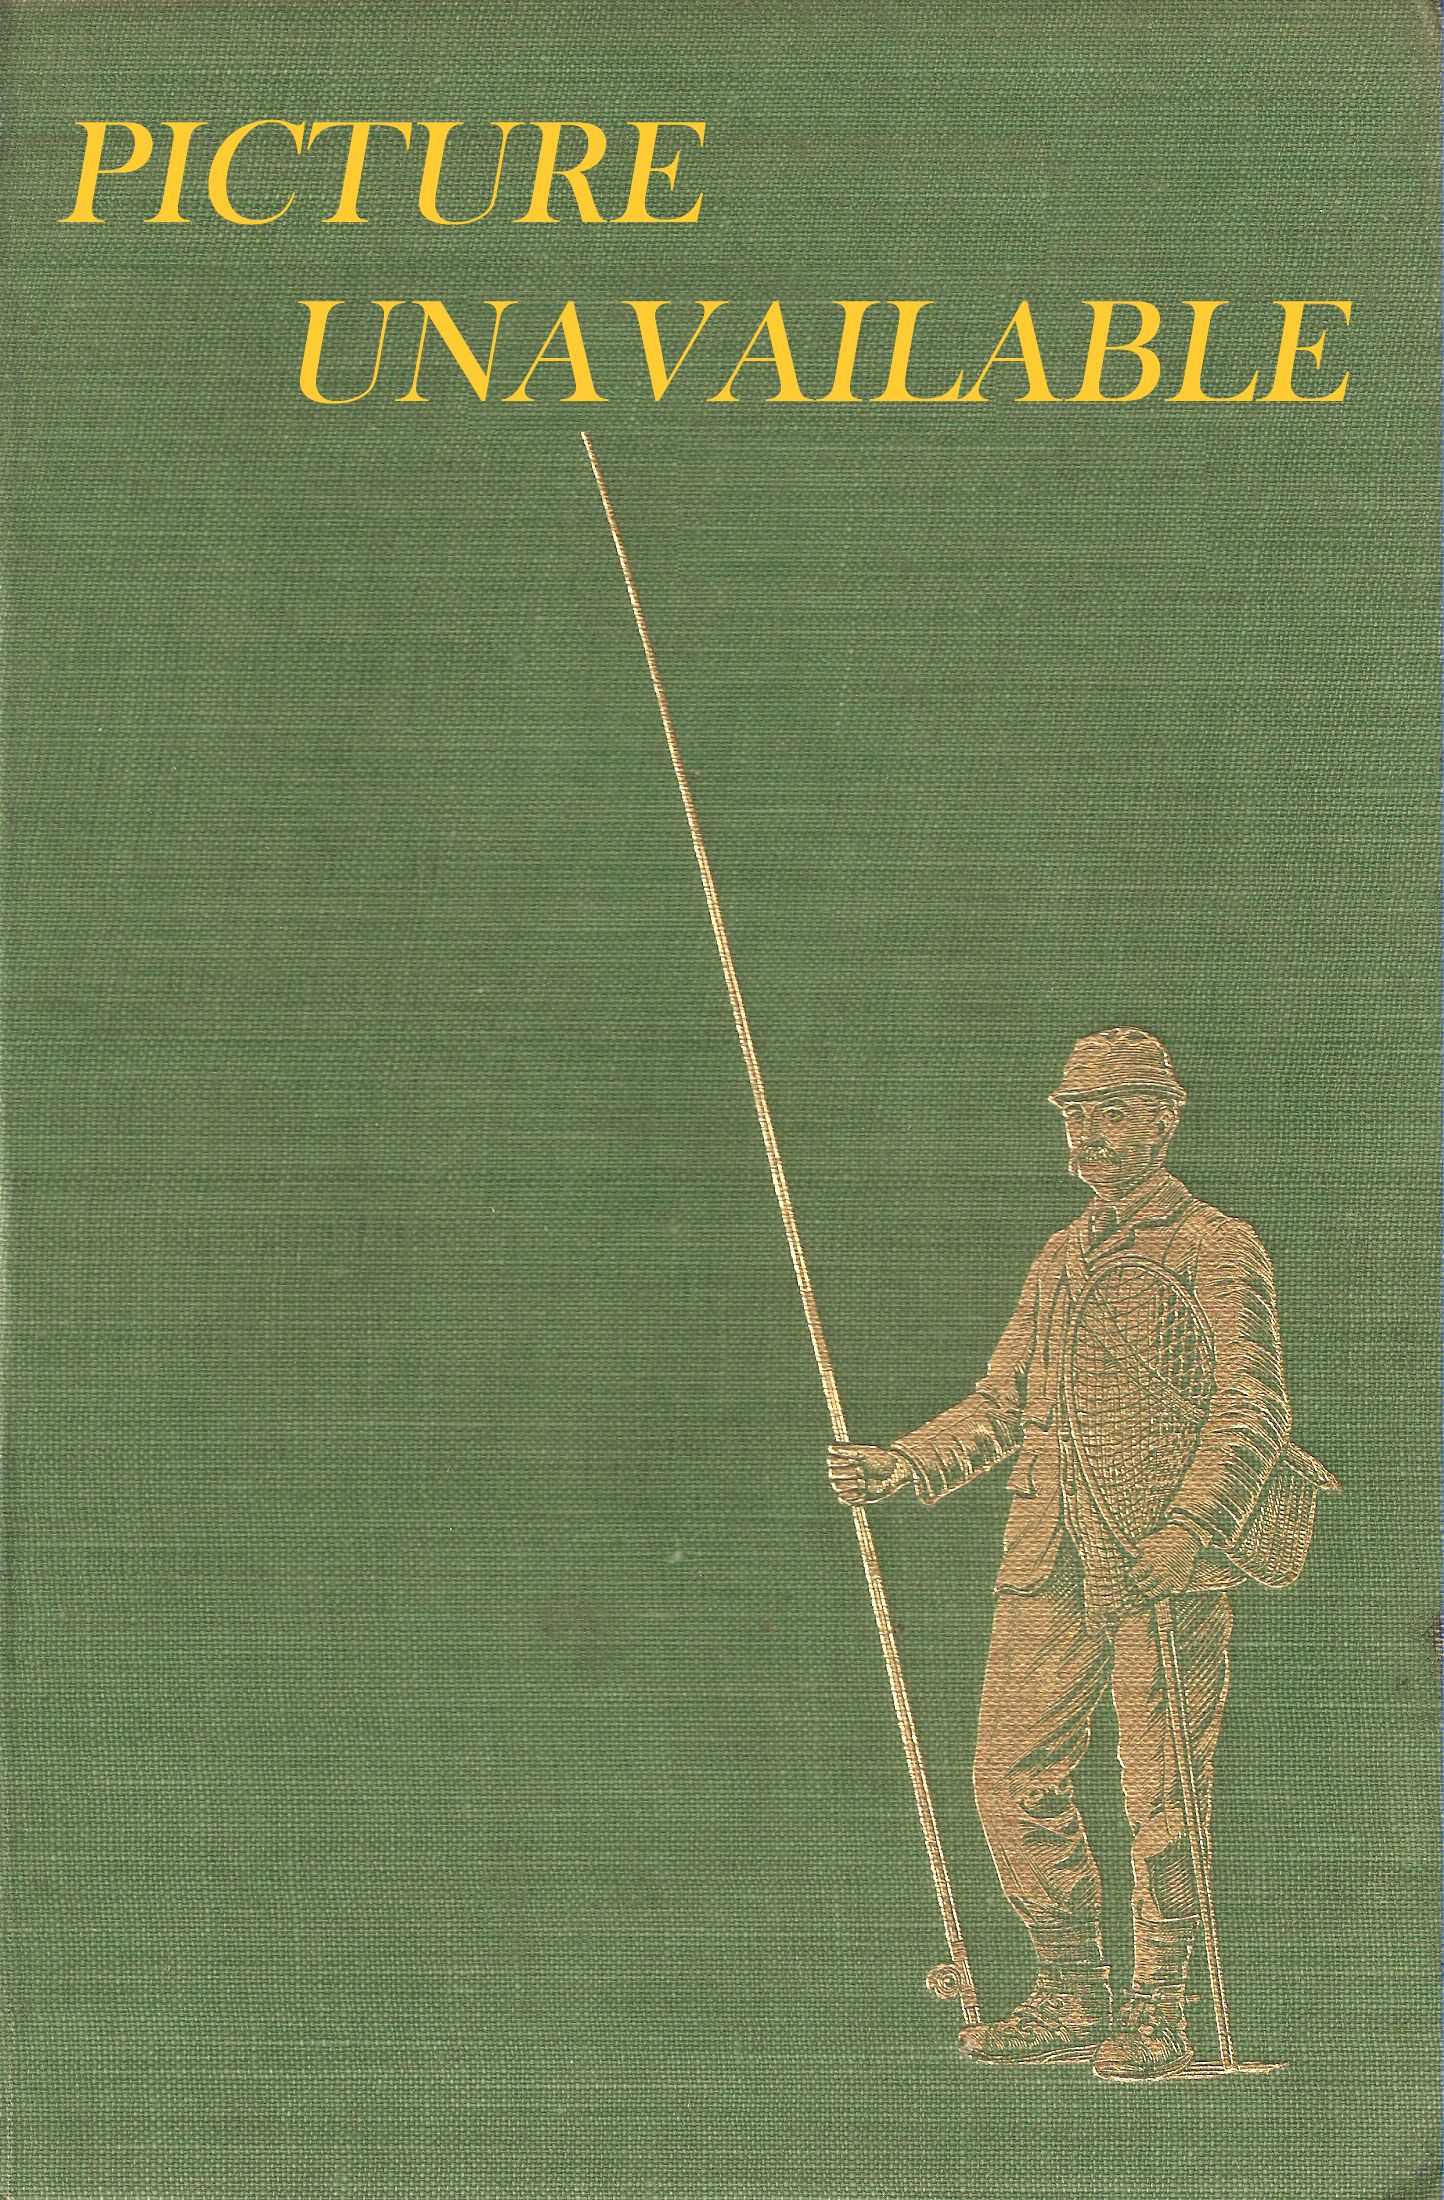 PIKE FISHING. By Norman L. Weatherall. The Sports and Pastimes Library.